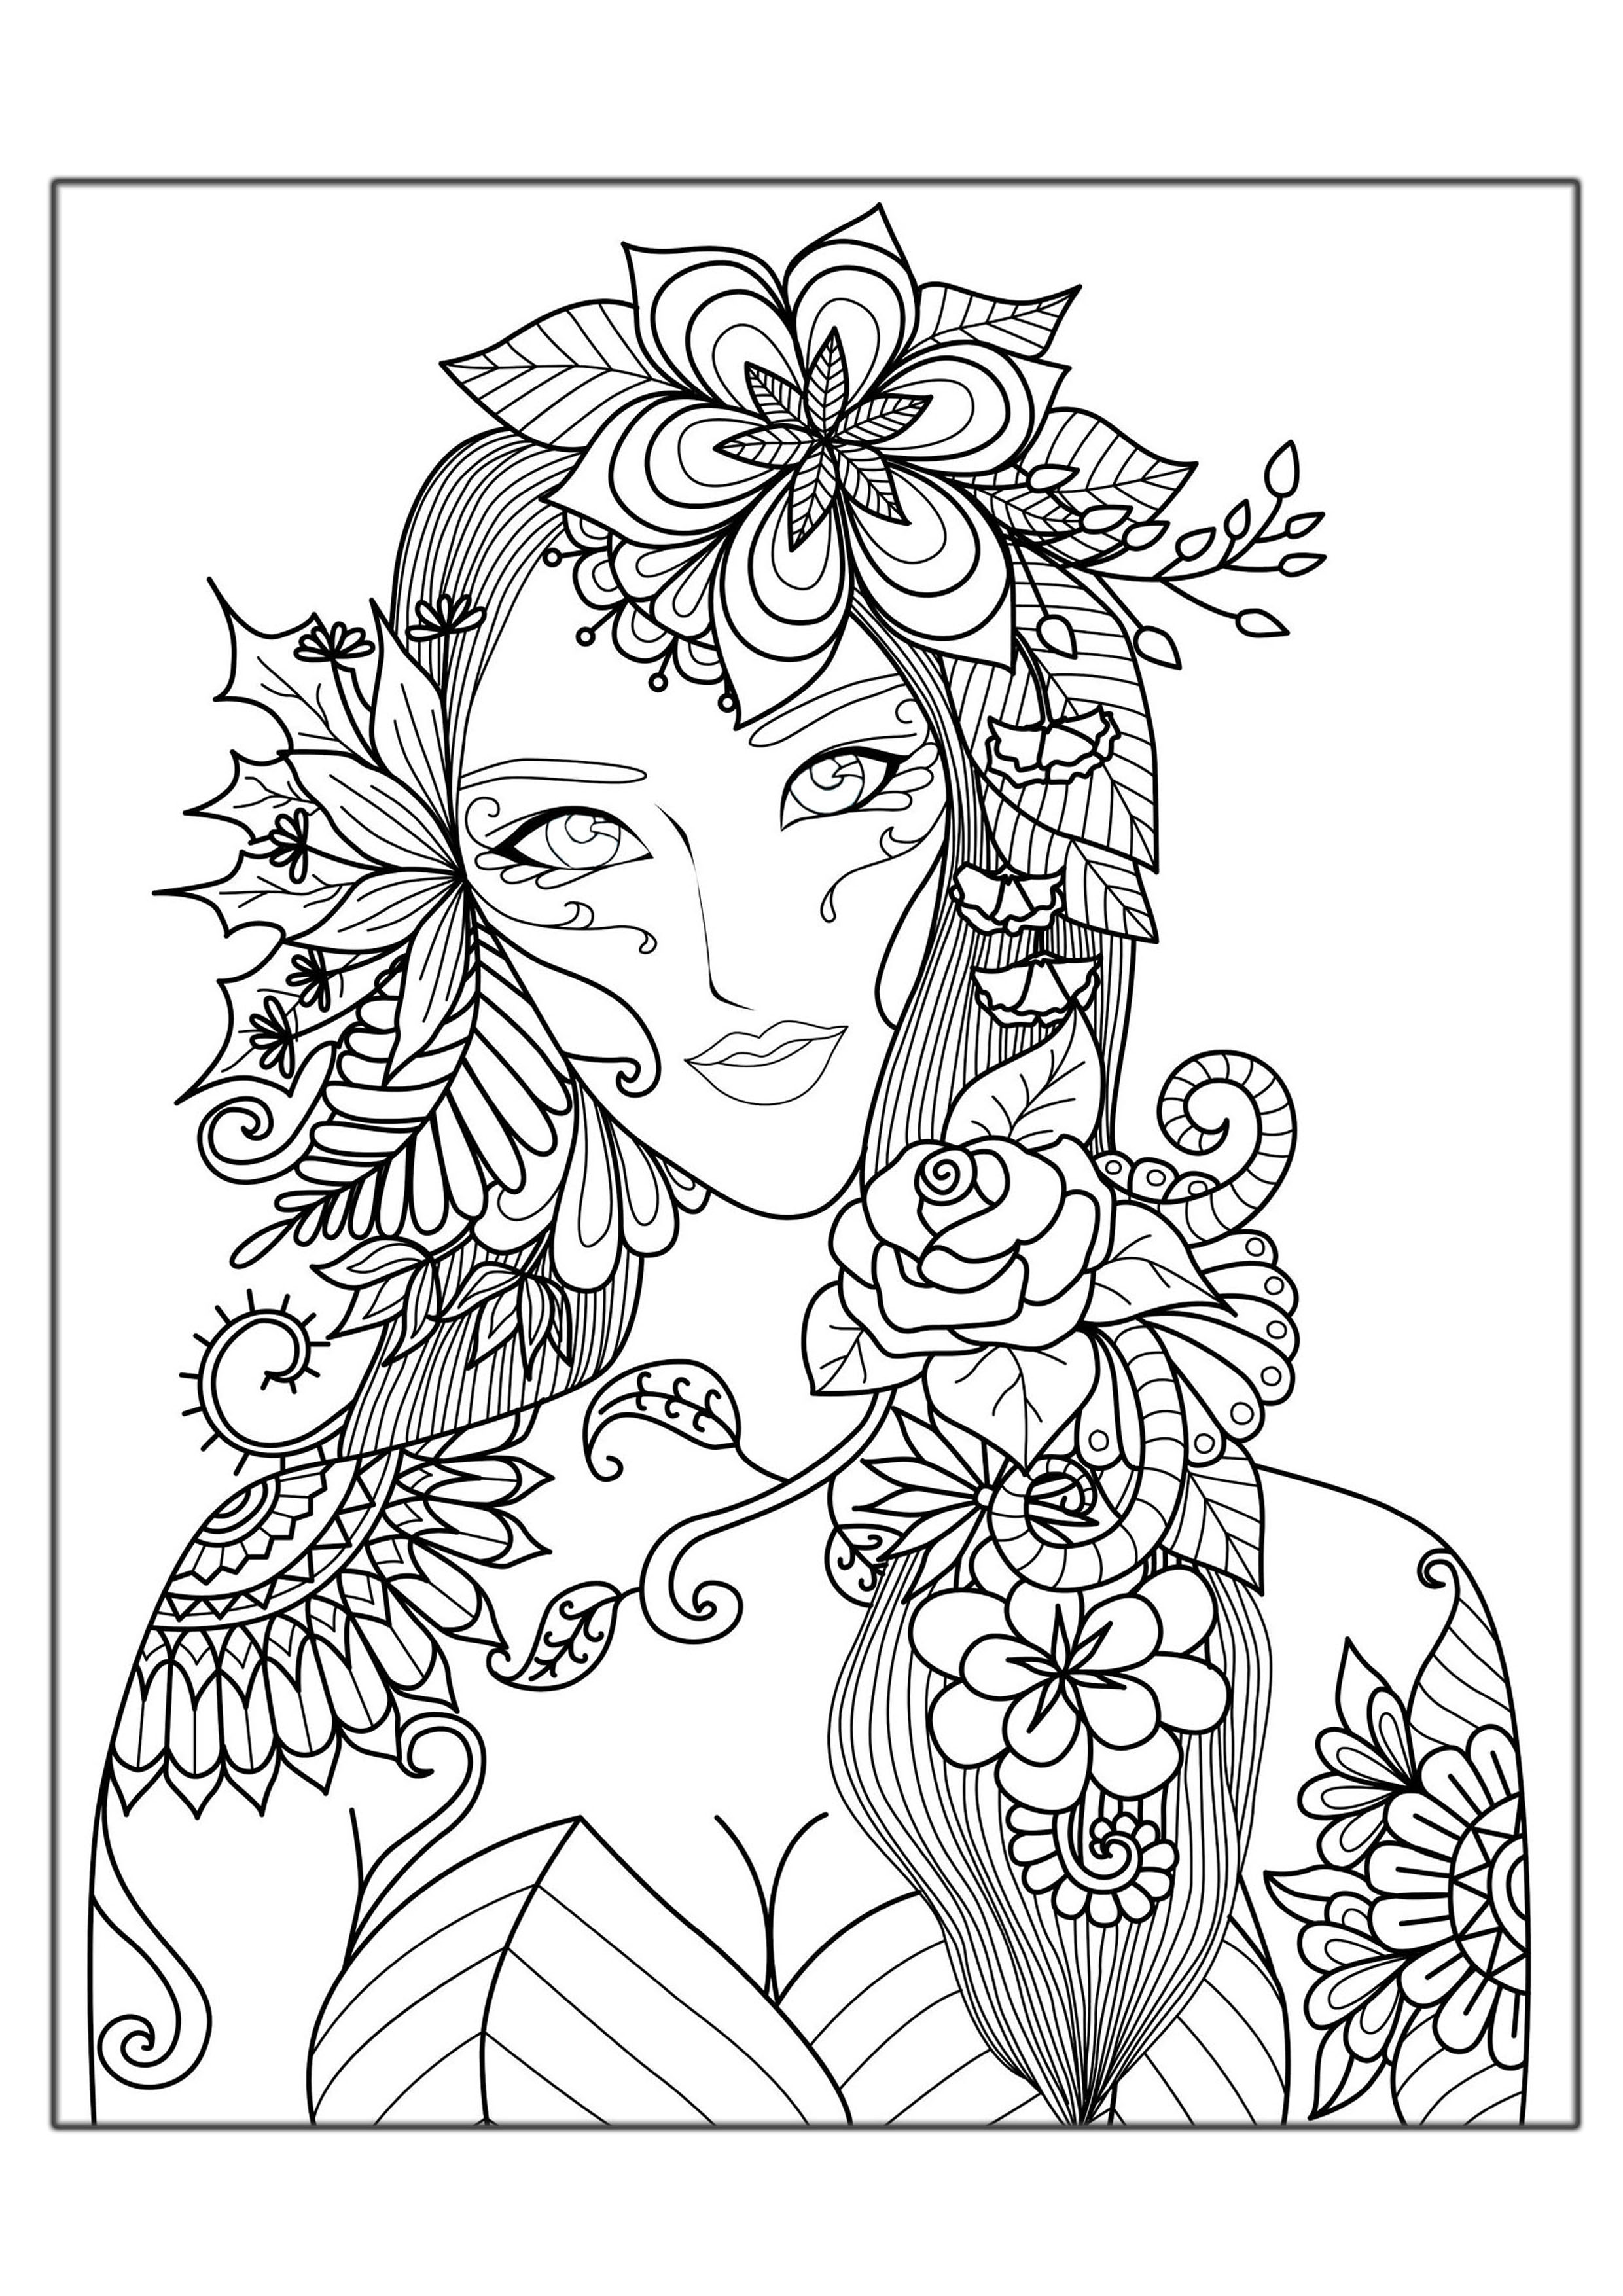 Download Woman Flowers Anti Stress Adult Coloring Pages